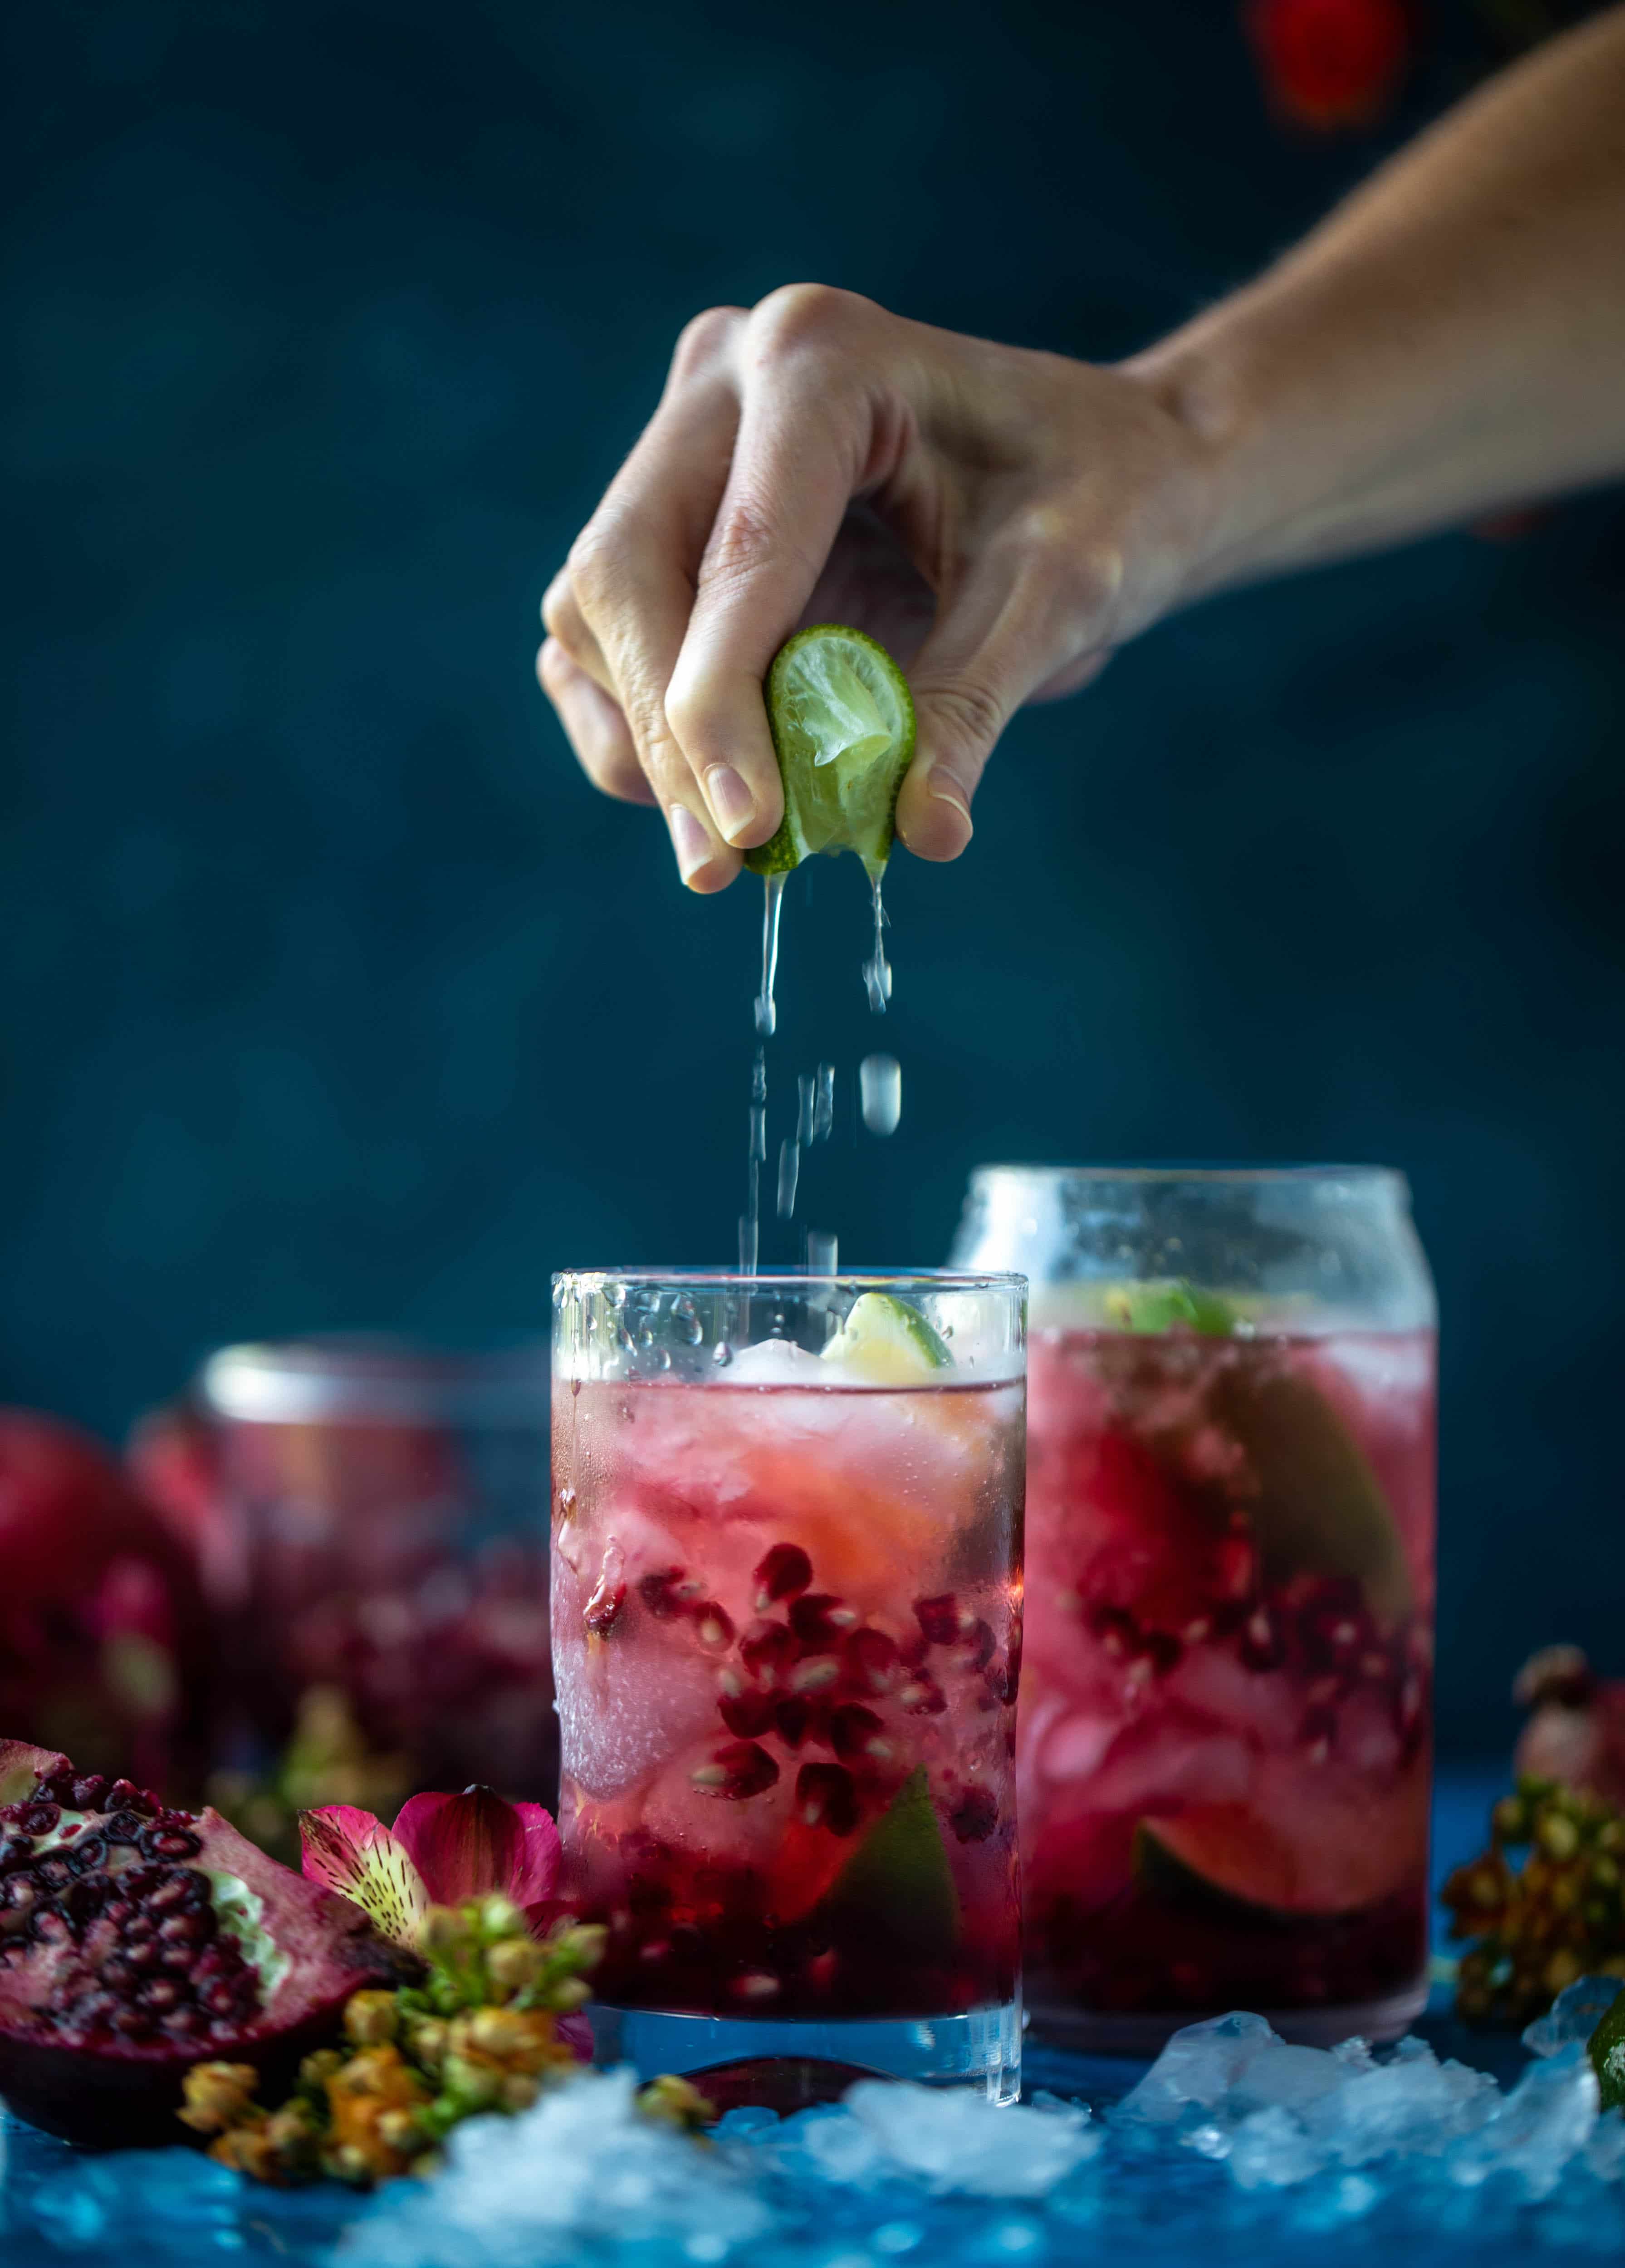 This pomegranate gin and tonic is the best way to transition your cocktail party life from the hot weather into fall! Tastes delish and looks pretty too!